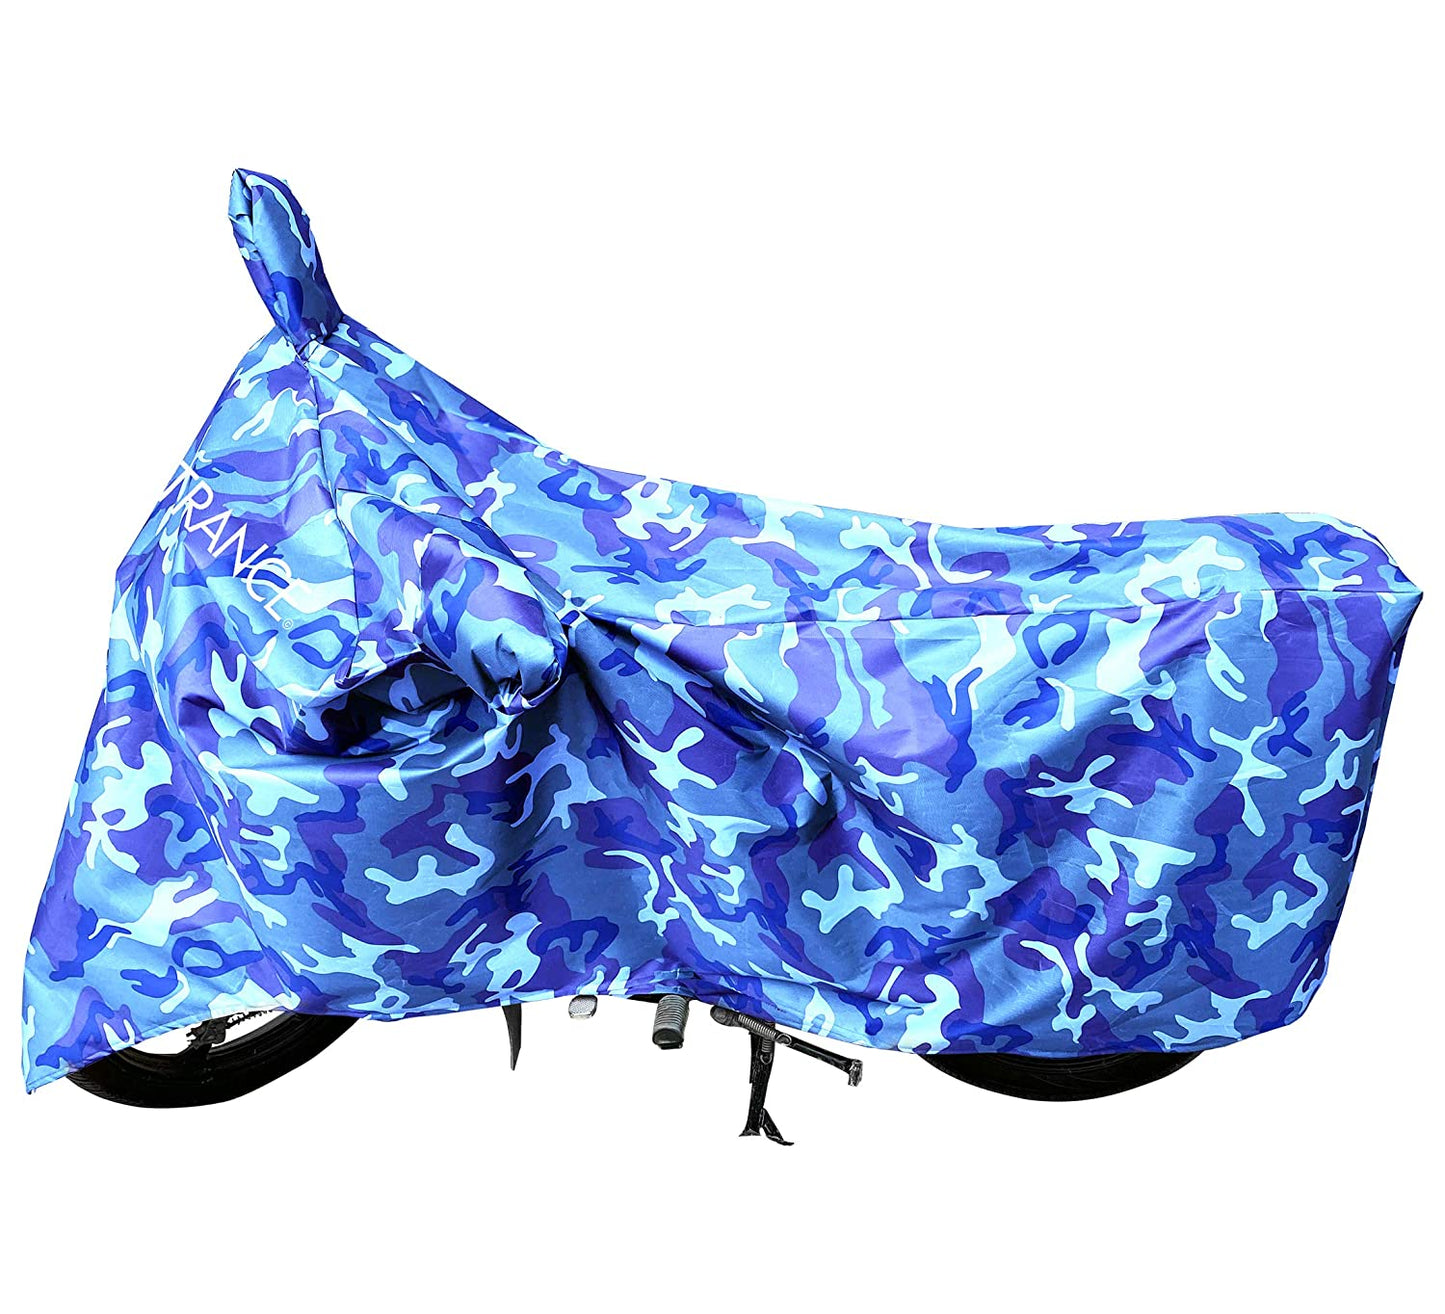 MotoTrance Jungle Bike Body Covers For Kawasaki Z1000 - Interlock-Stitched Waterproof and Heat Resistant with Mirror Pockets